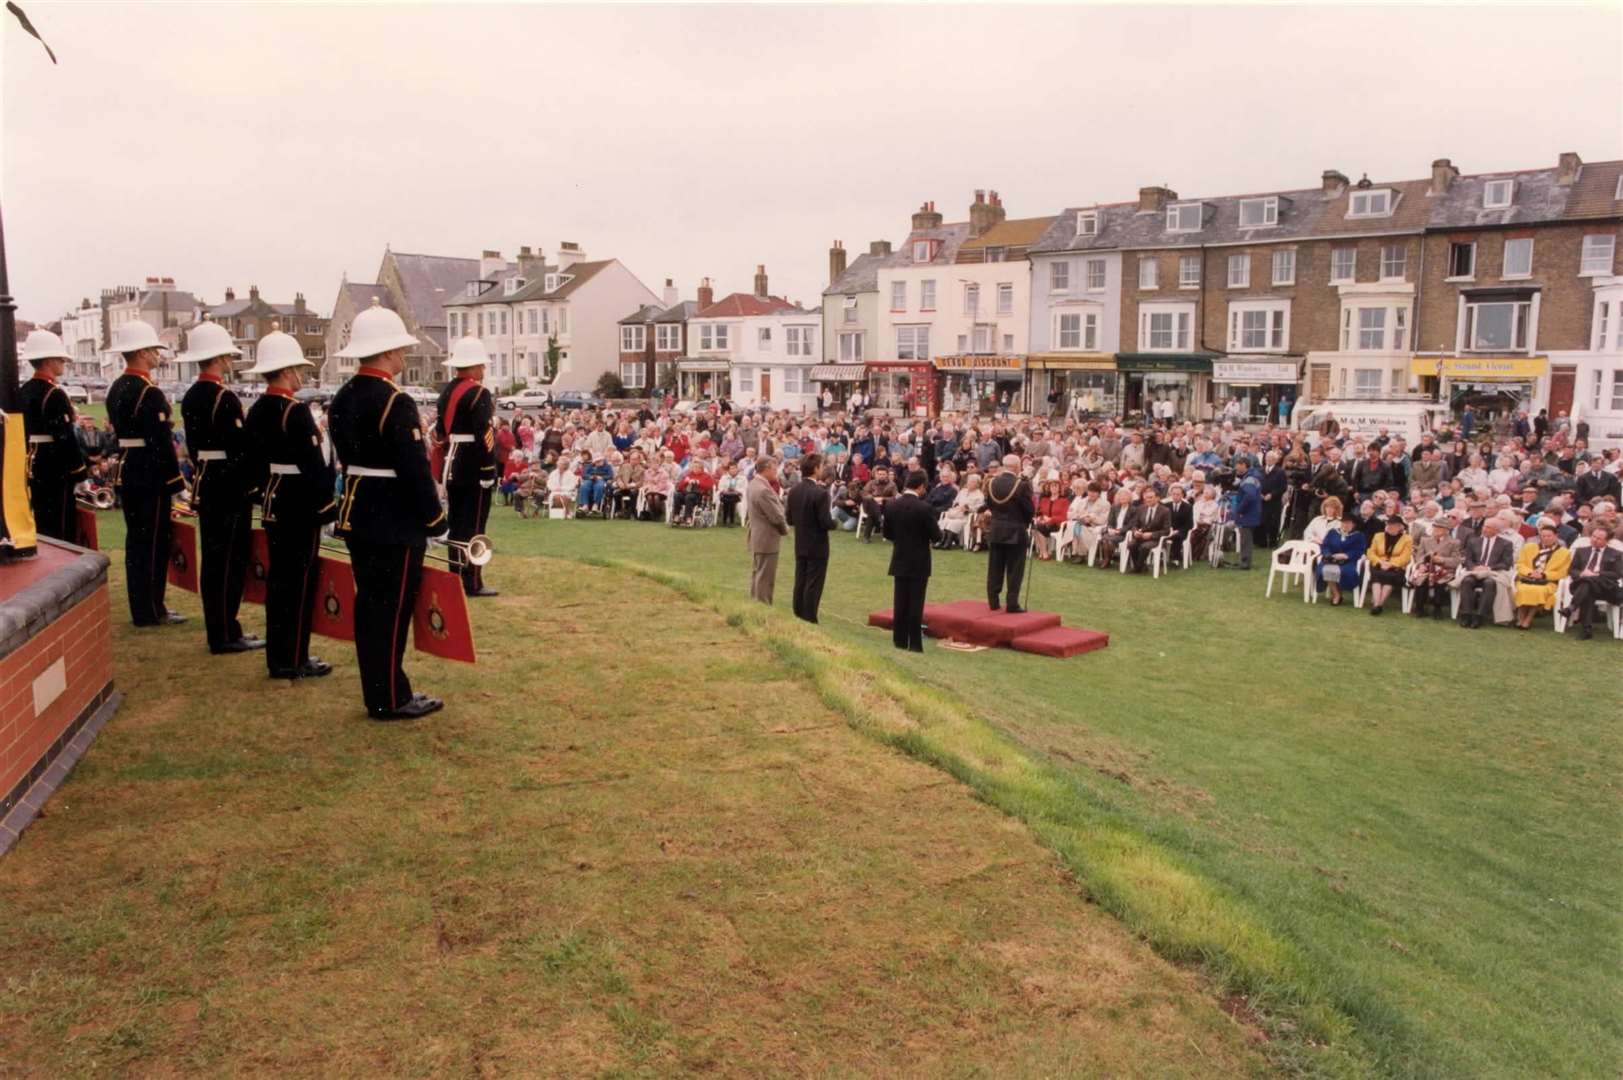 The opening ceremony of the Deal Memorial Bandstand on May 2, 1993